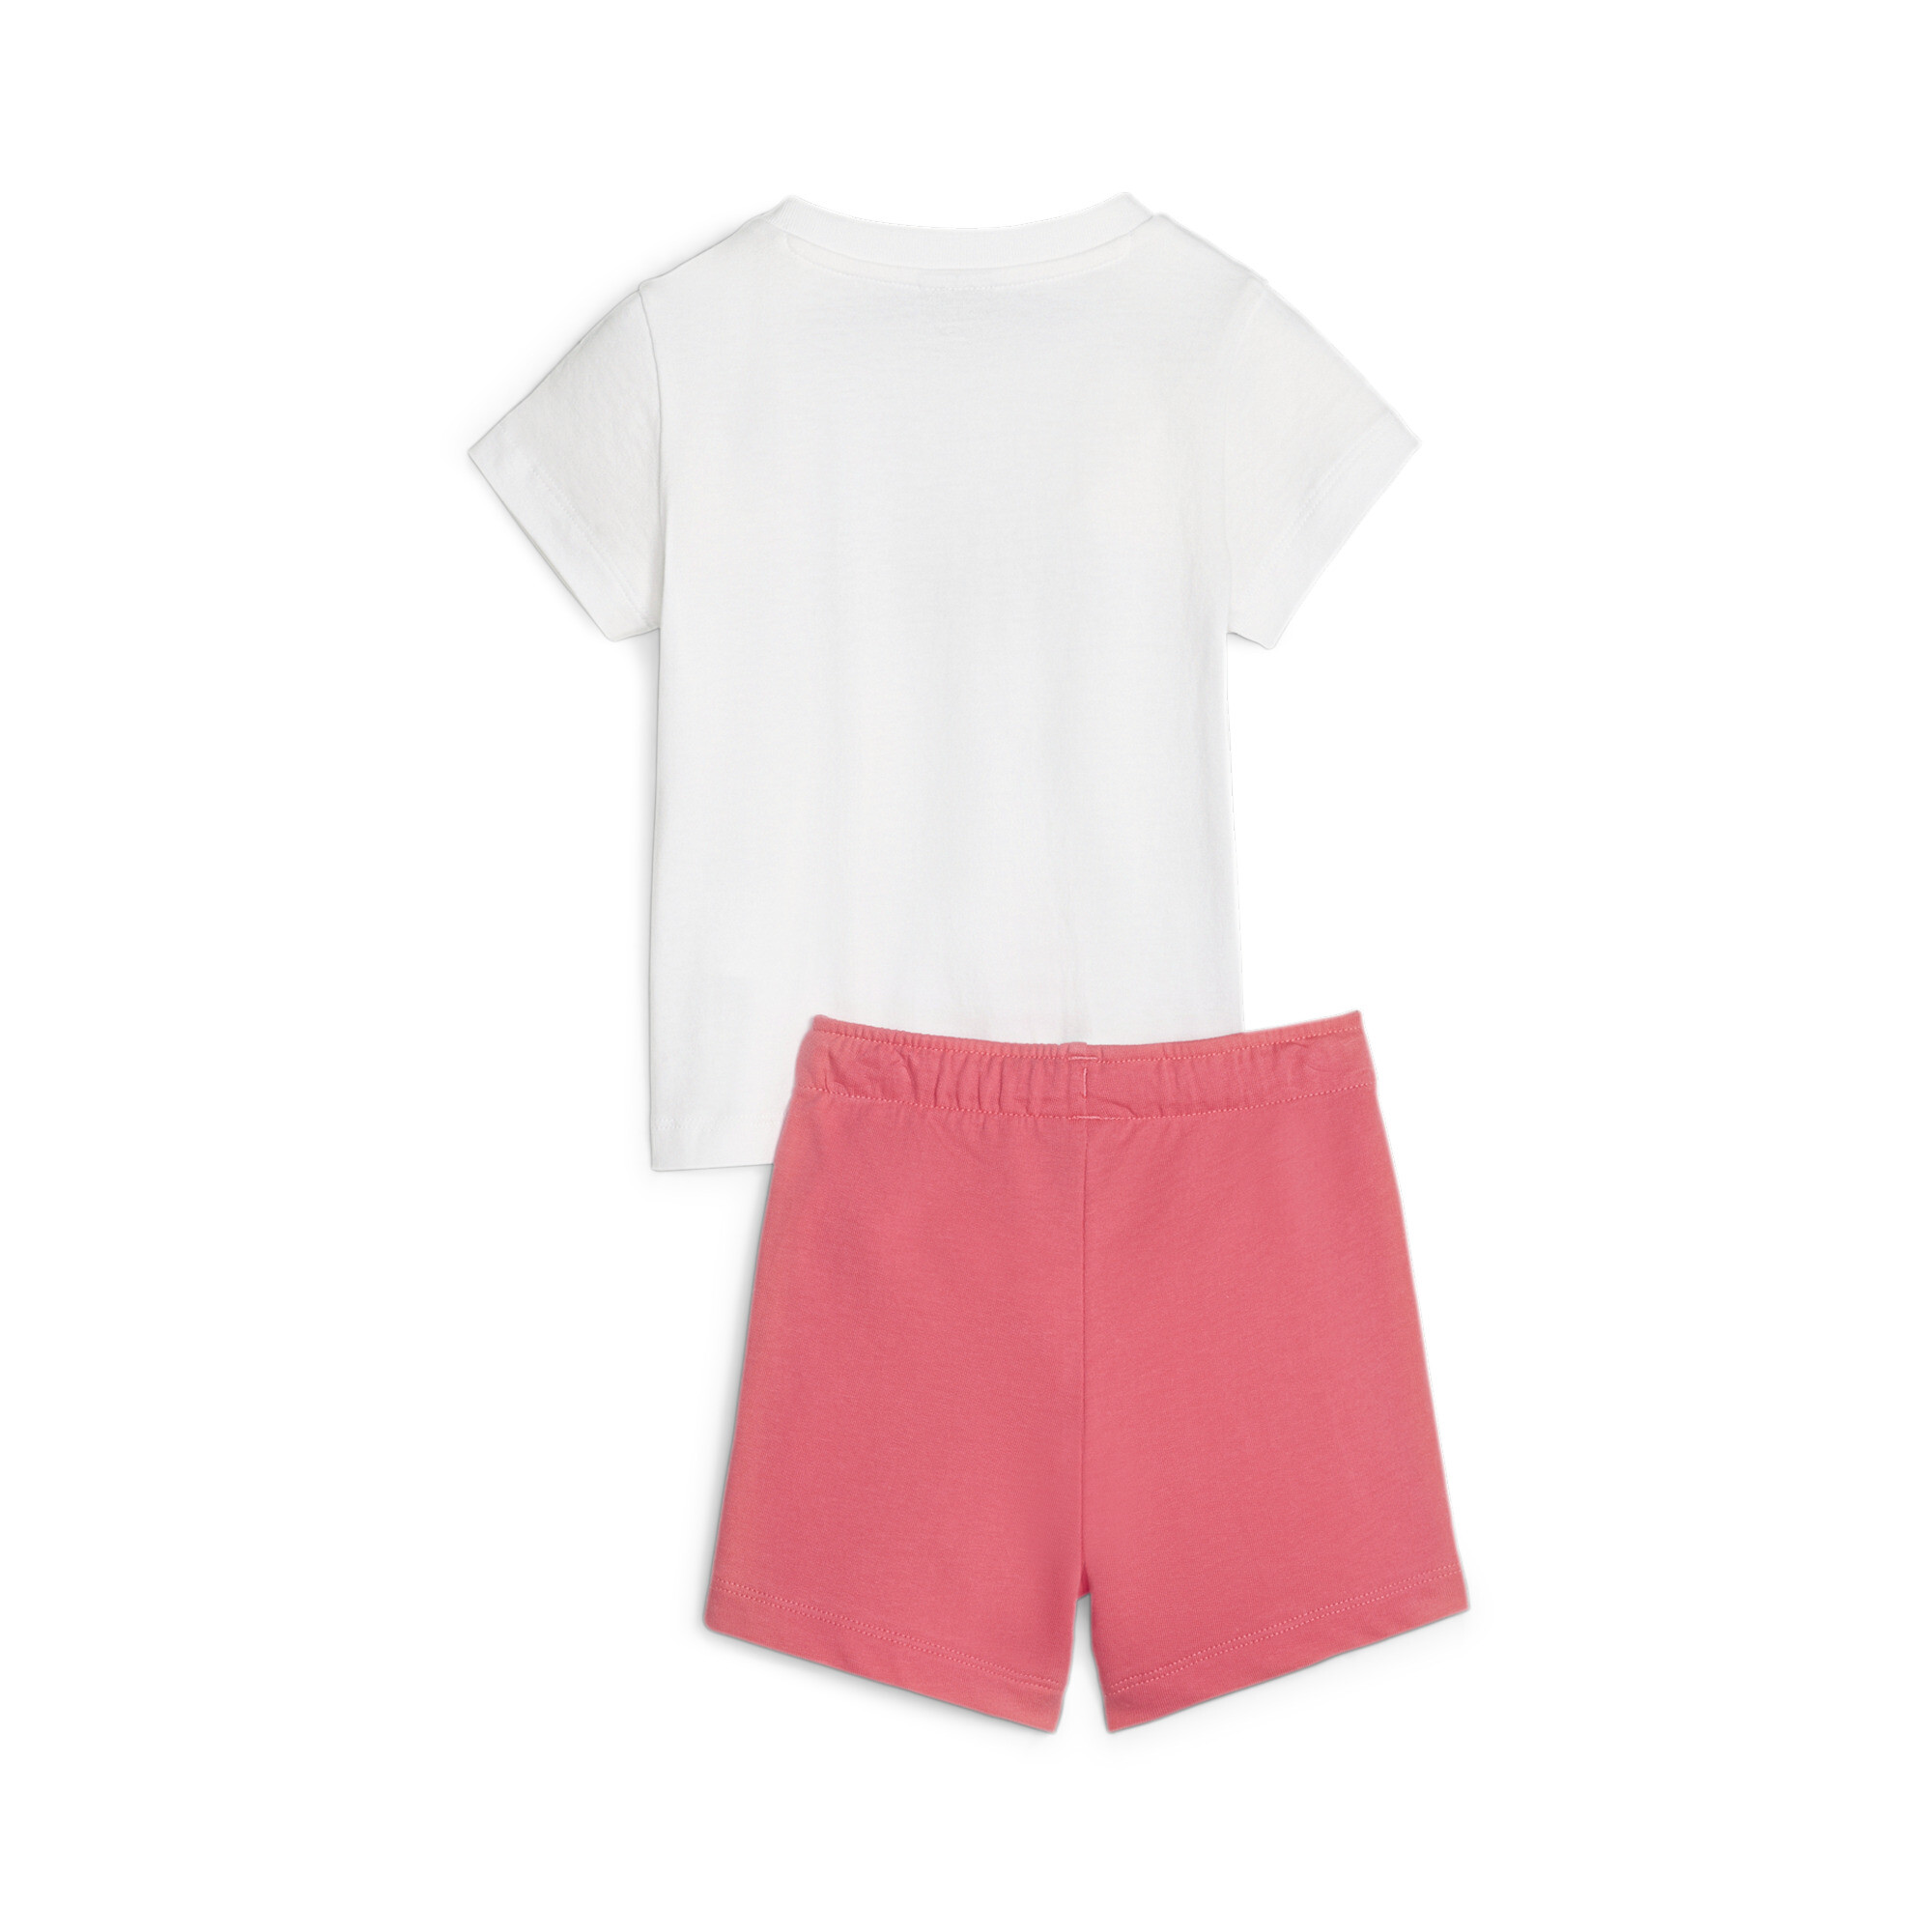 PUMA Minicats T-Shirt And Shorts Babies' Set In Pink, Size 9-12 Months